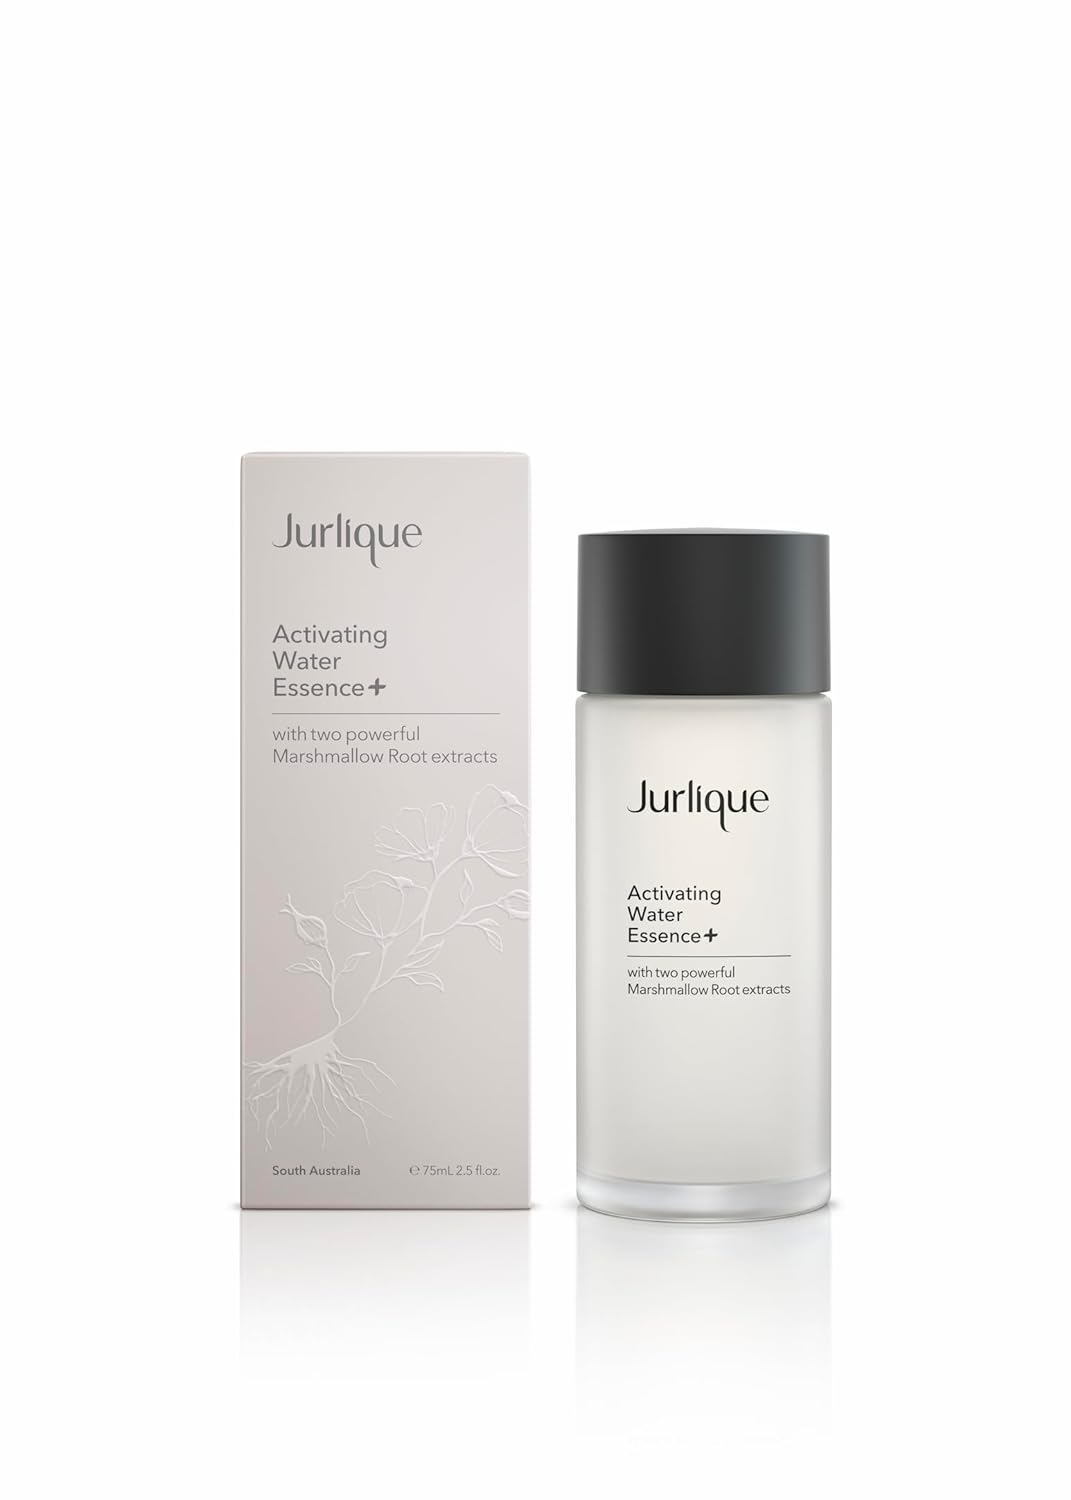 Jurlique Activating Water Essence+ with Marshmallow Root Extract, 2.5